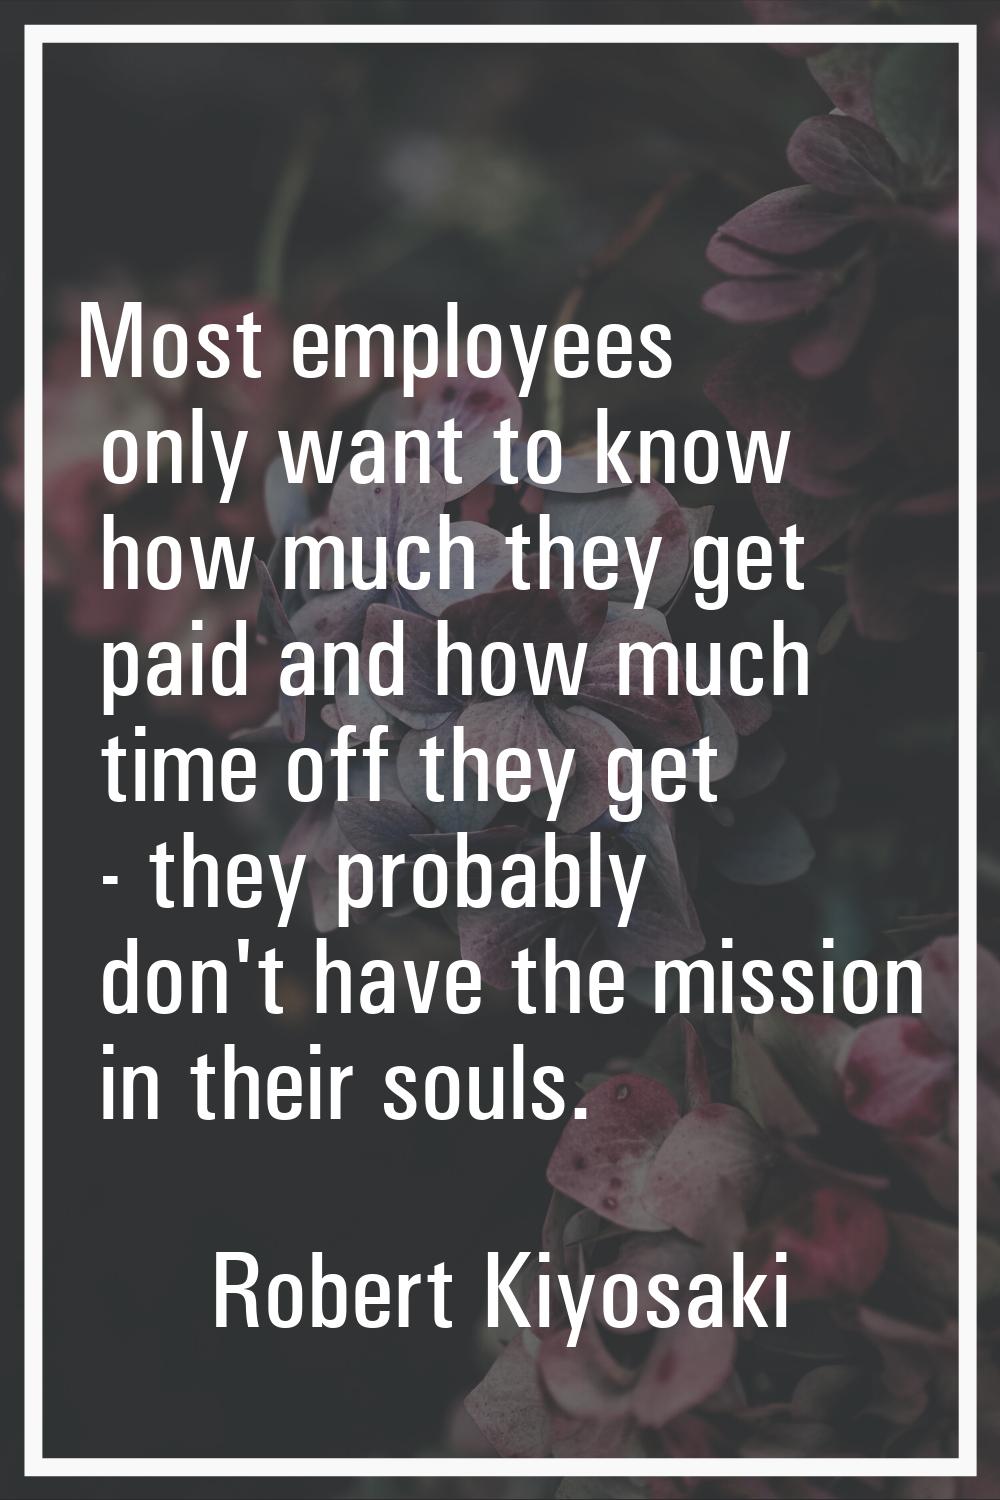 Most employees only want to know how much they get paid and how much time off they get - they proba